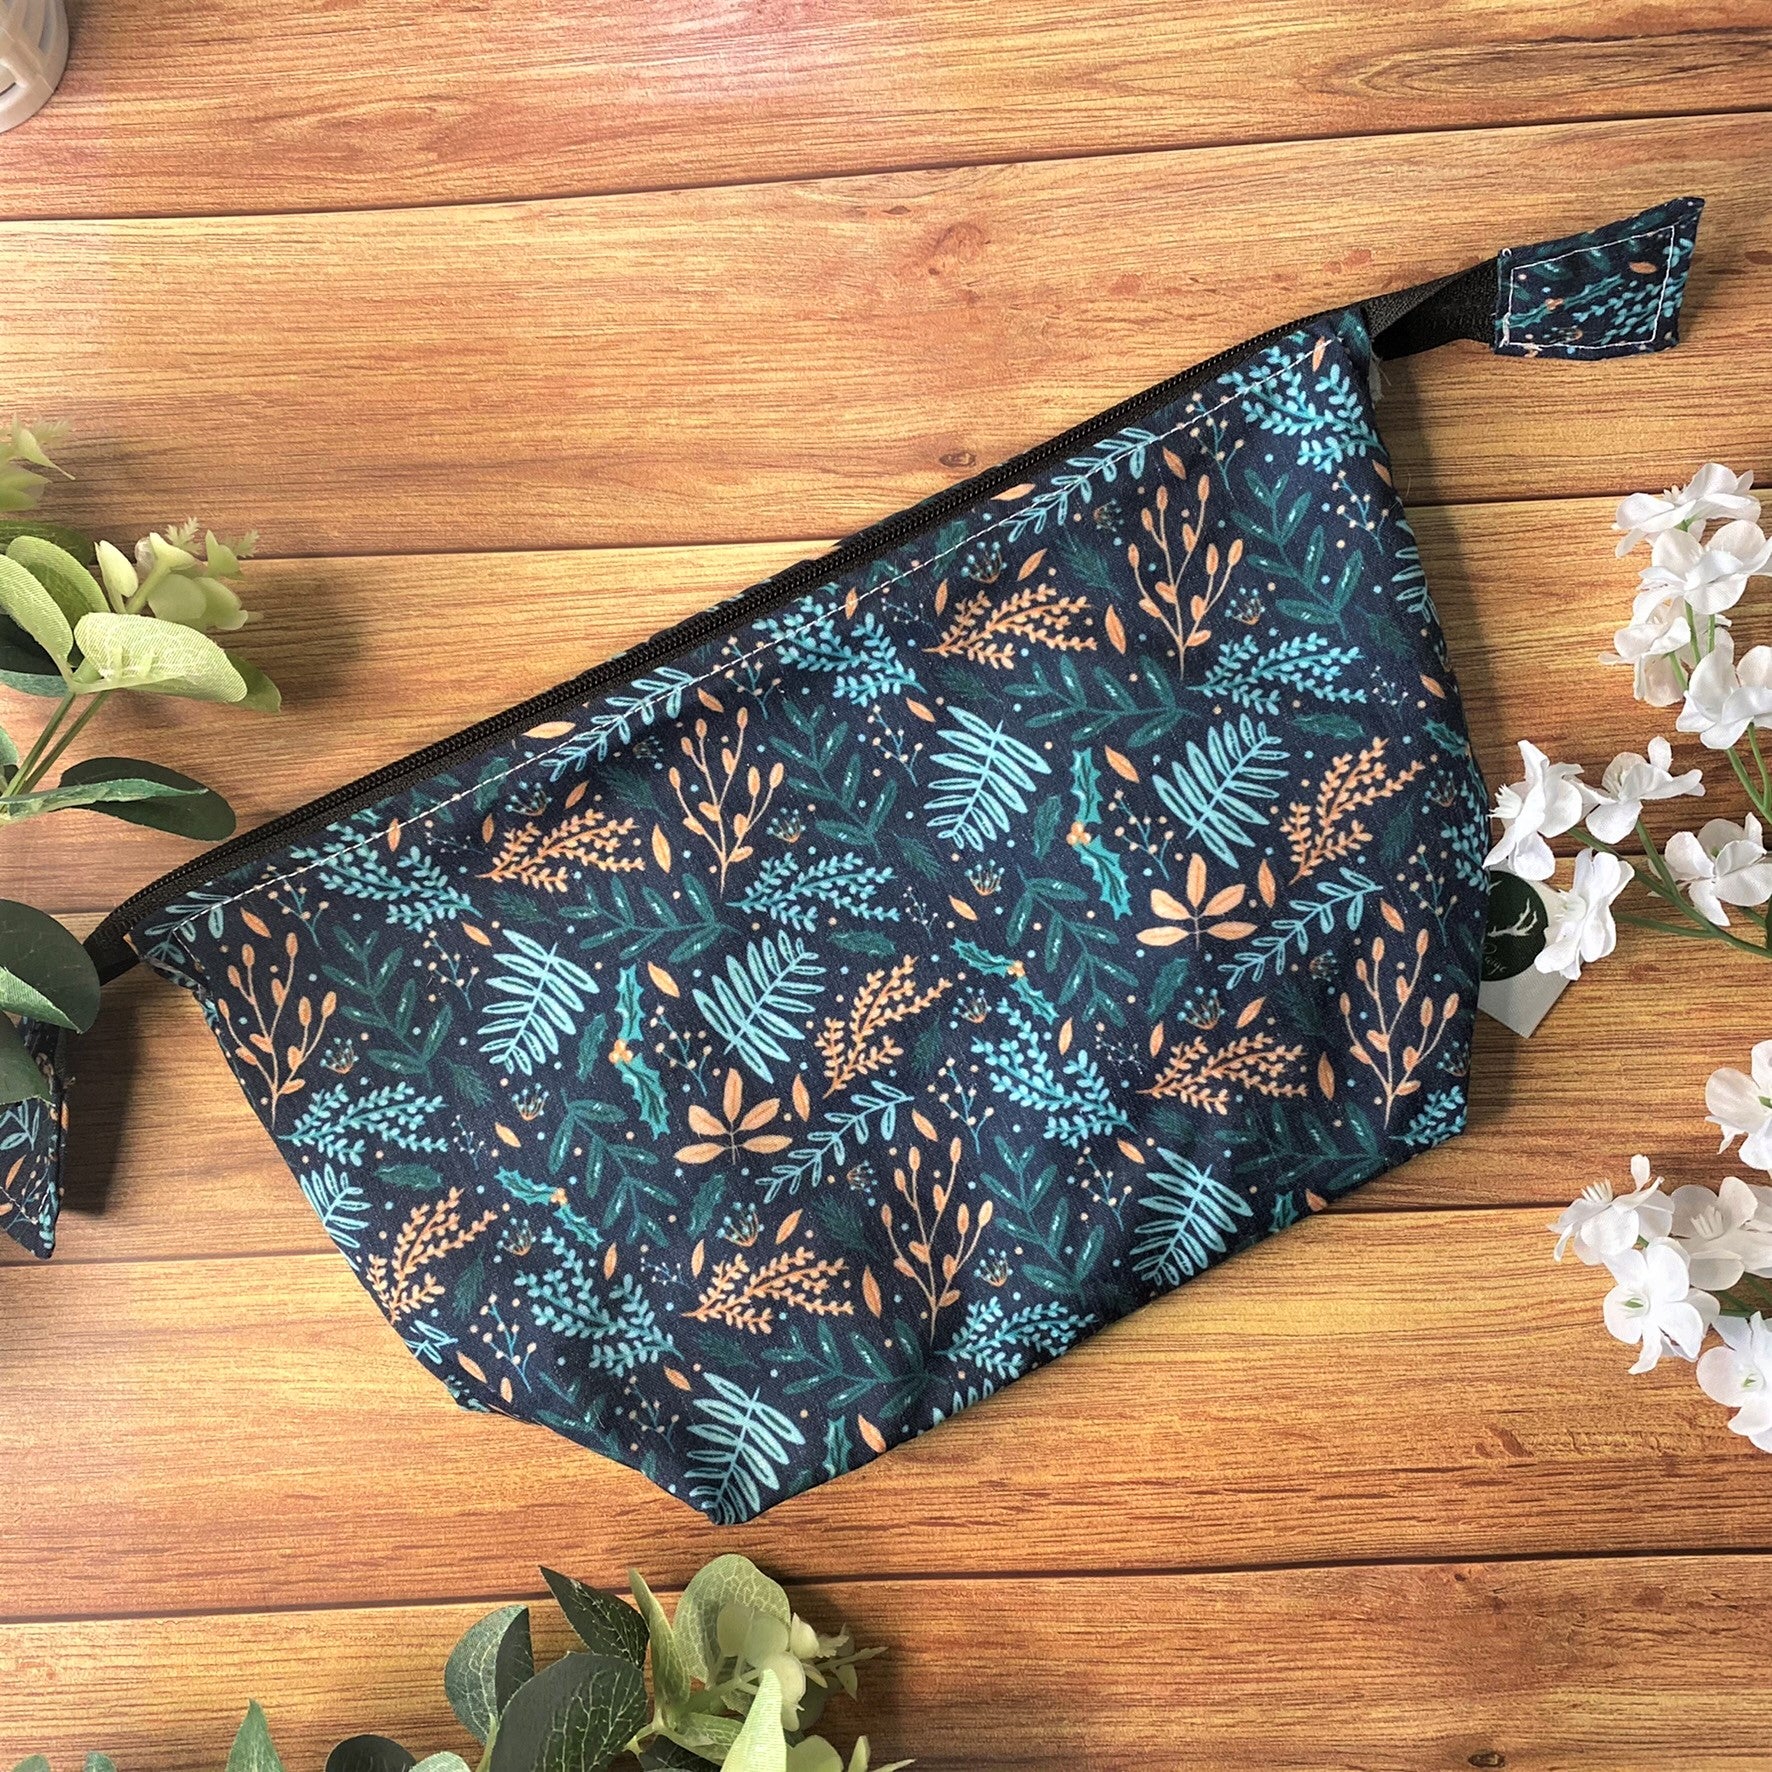 dark foliage patterned makeup bag on a wooden background with green and white foliage around it